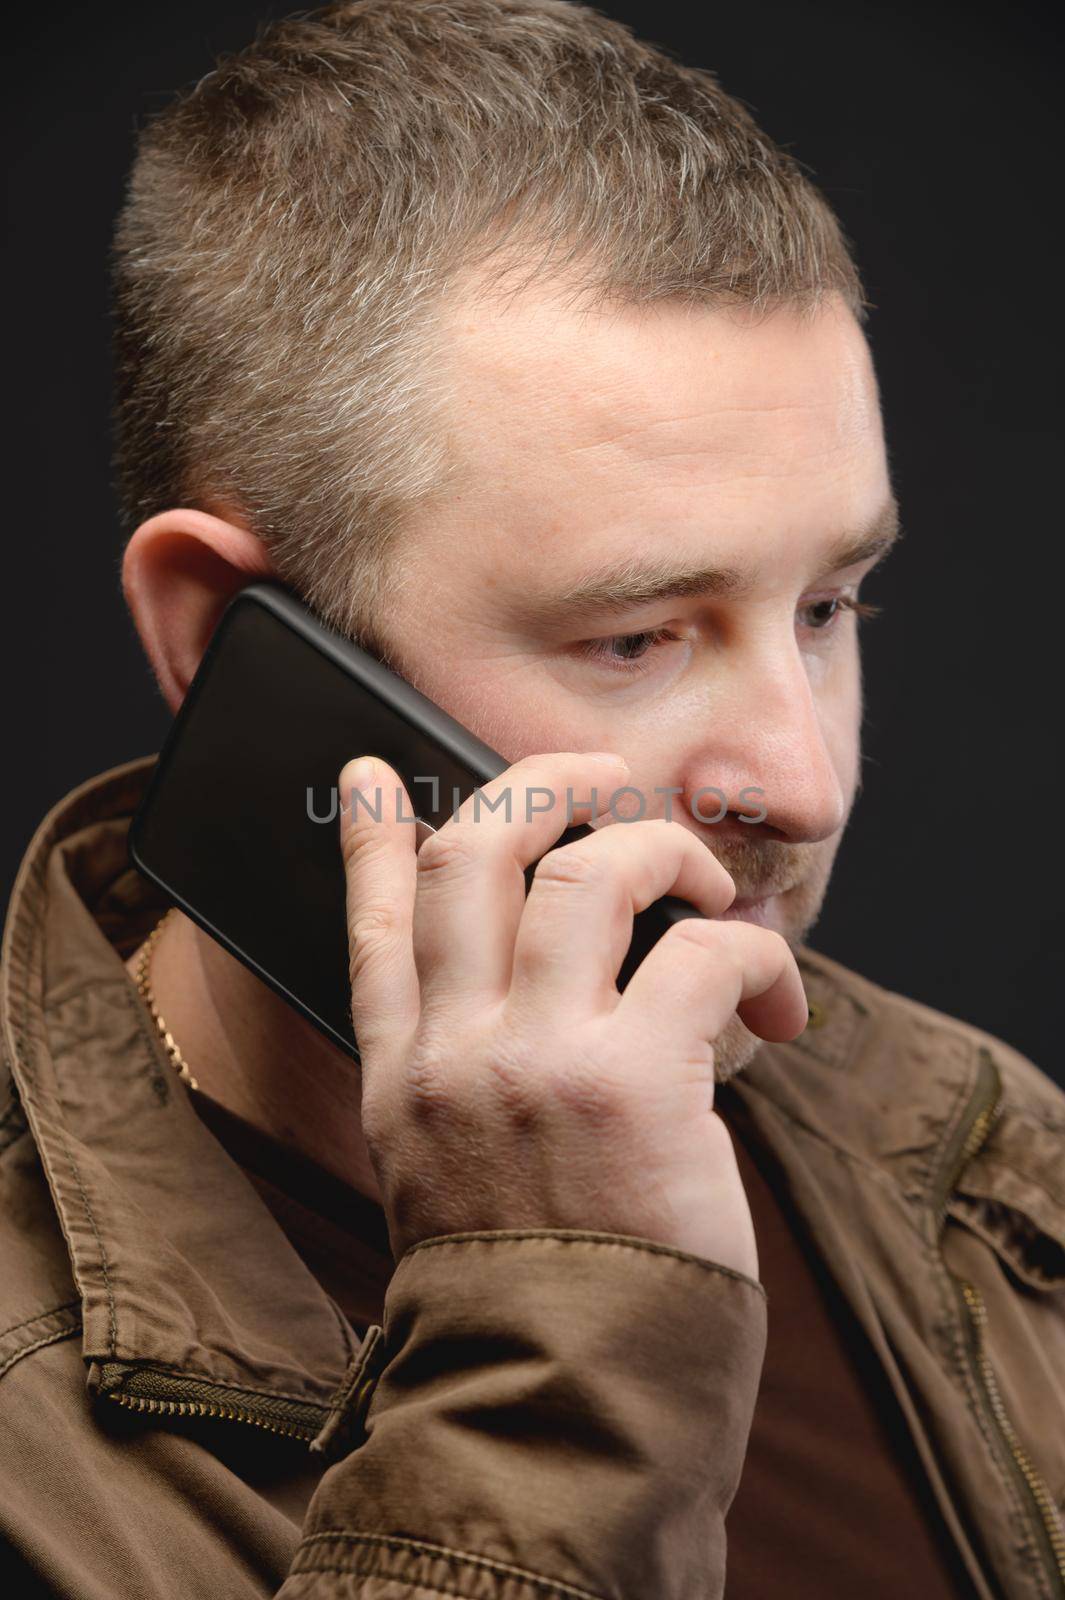 An anxious middle-aged man calls and talks on the phone. Close-up. Studio portrait.